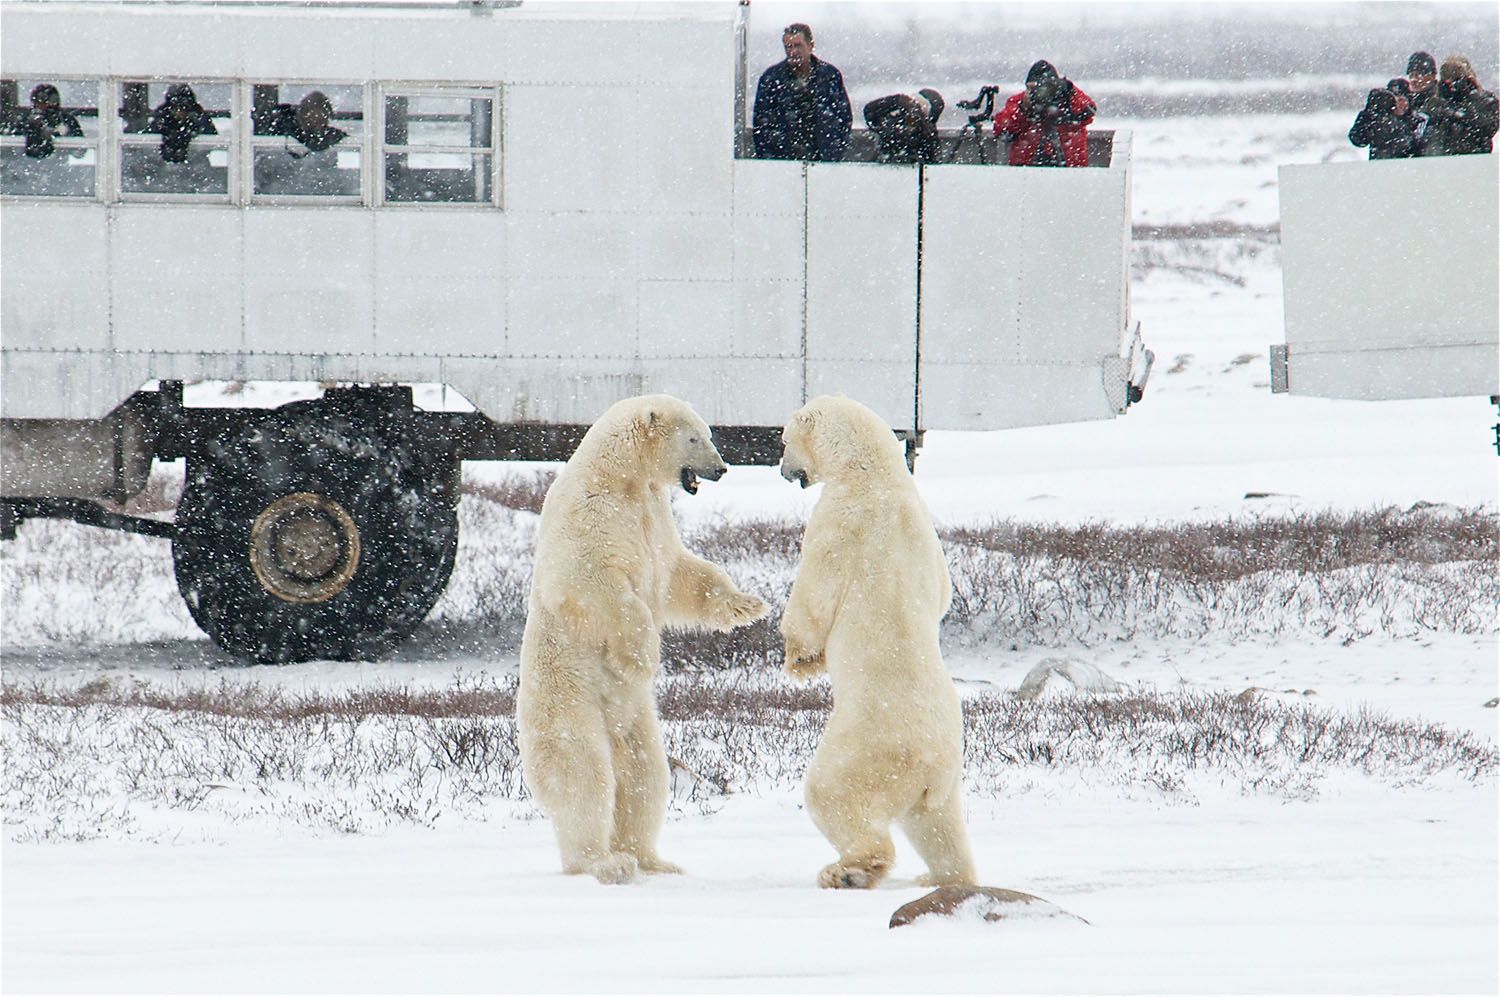 Two polar bears standing up and facing each other while people in a large white vehicle take their photos